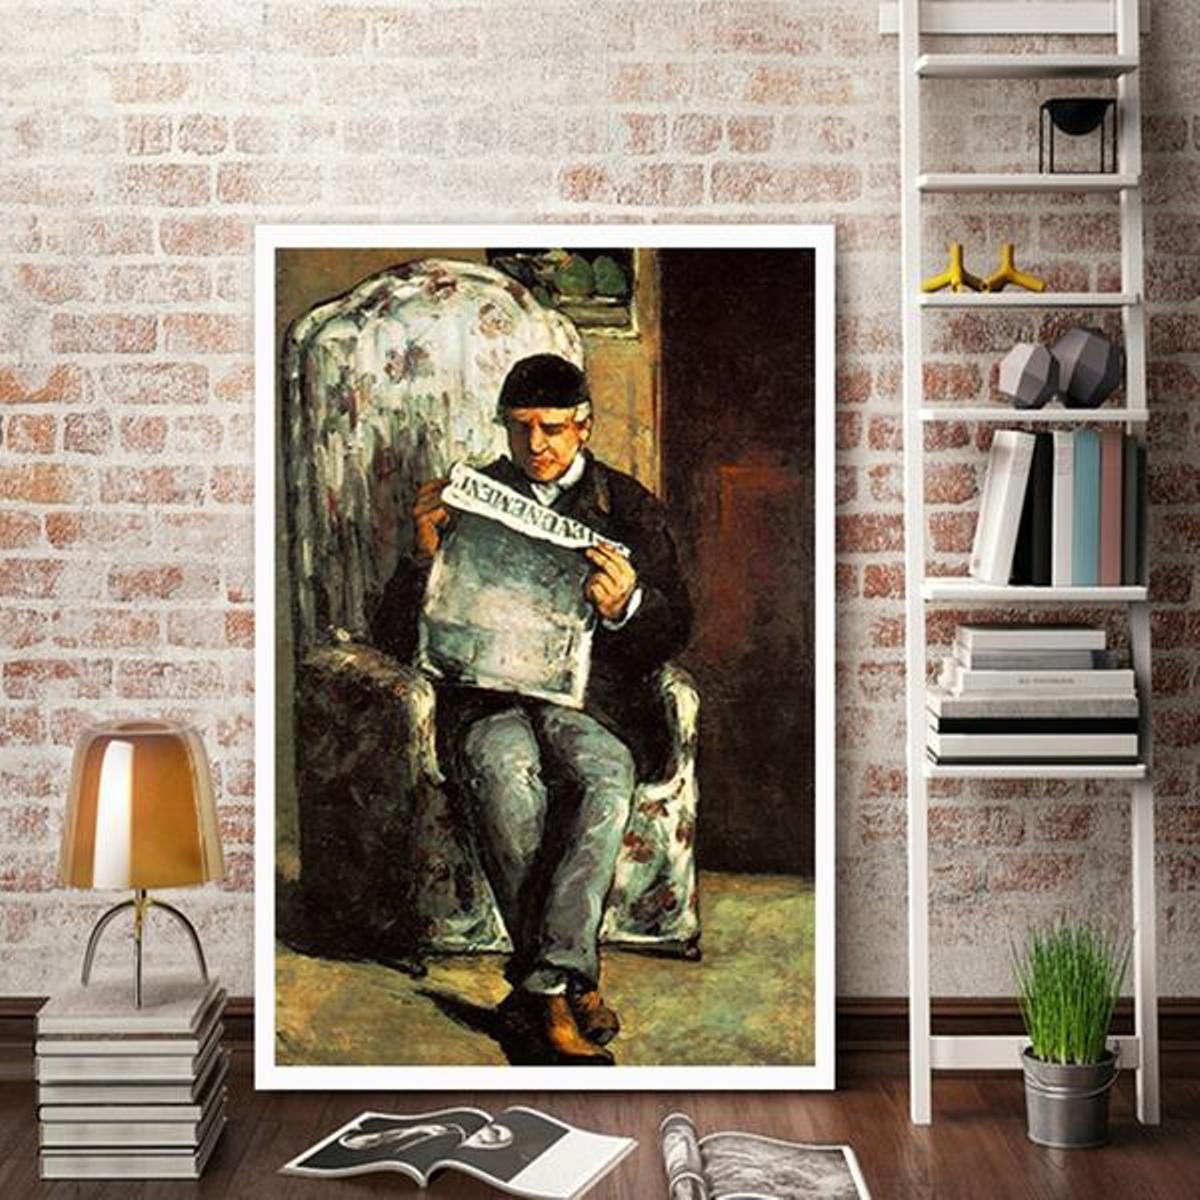 The Artist's Father Reading His Newspaper by Paul Cezanne - Van-Go Paint-By-Number Kit